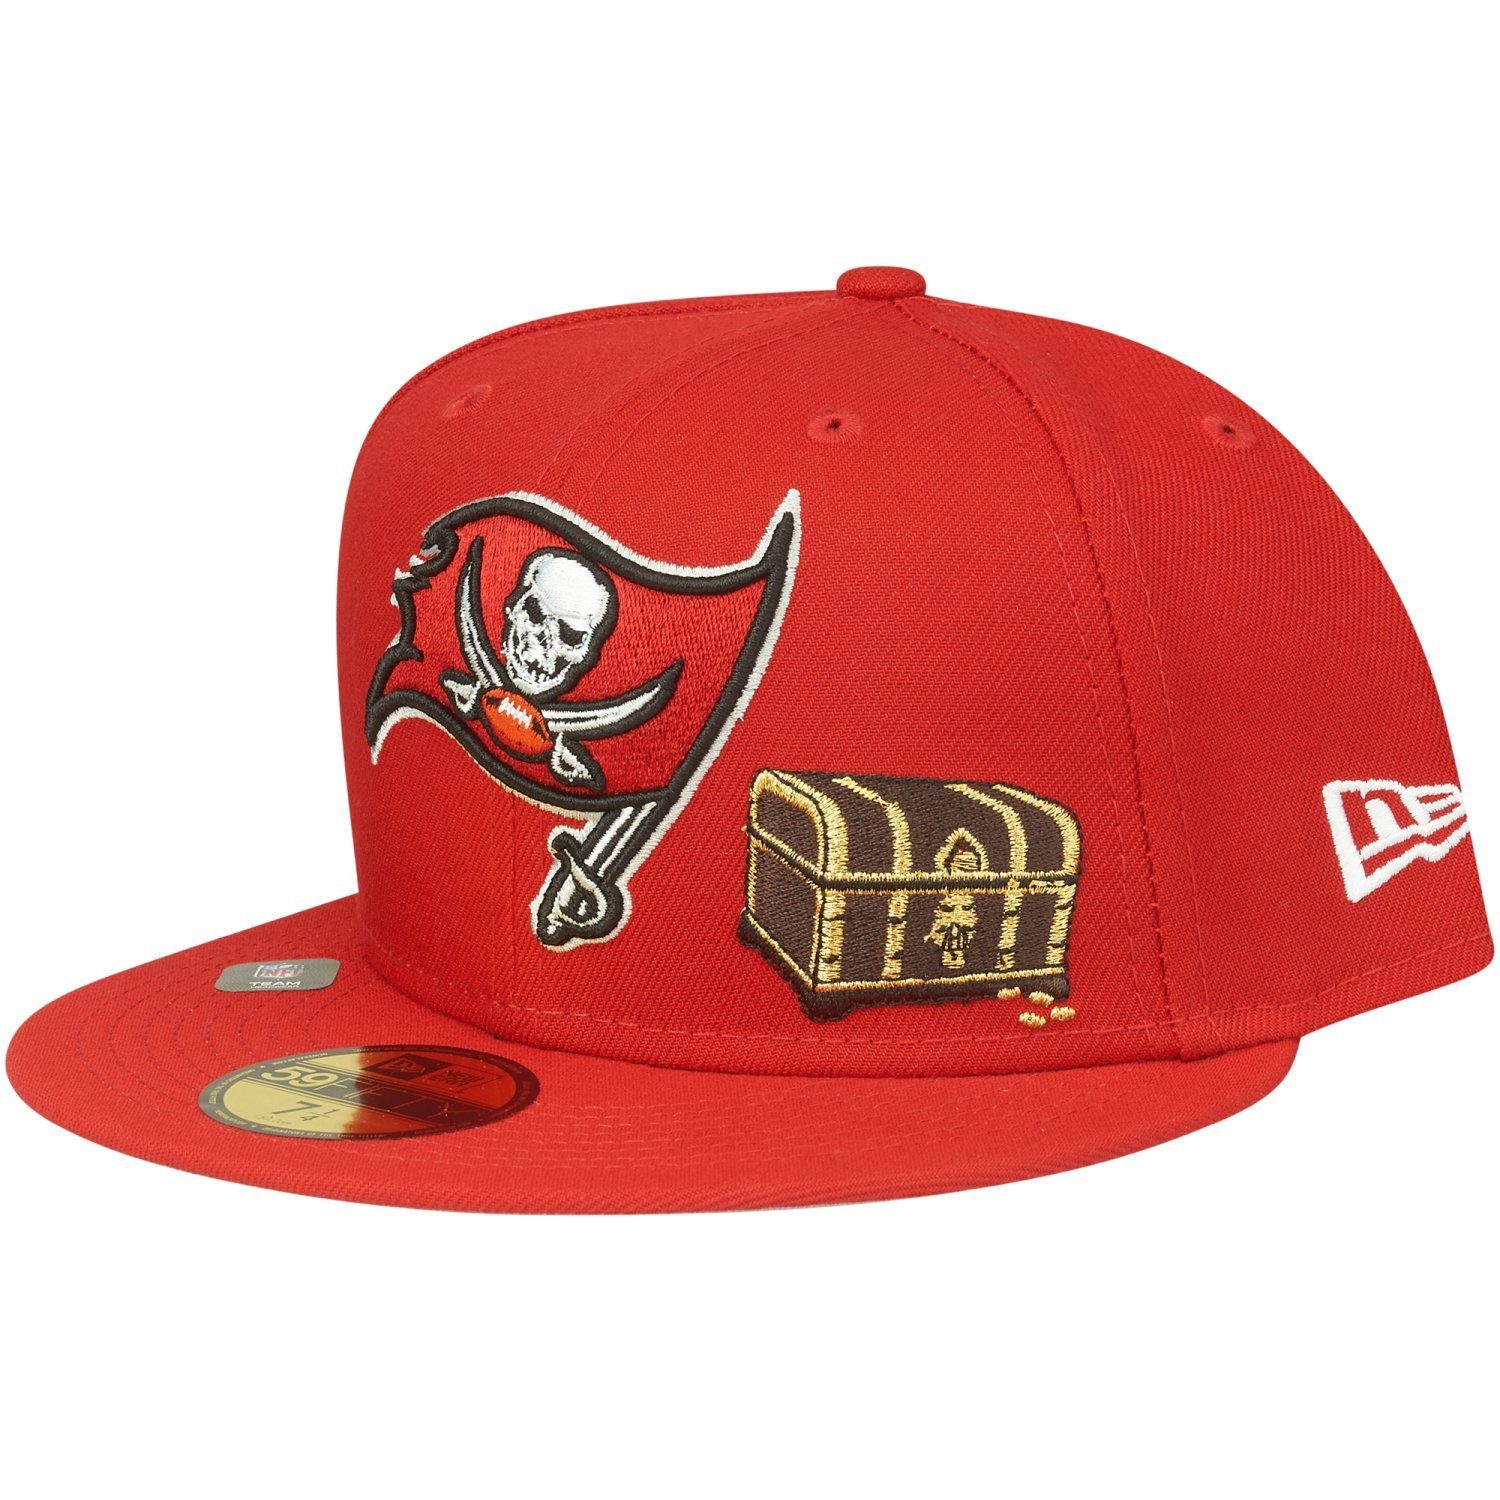 New Era Fitted Cap 59Fifty NFL CITY Tampa Bay Buccaneers